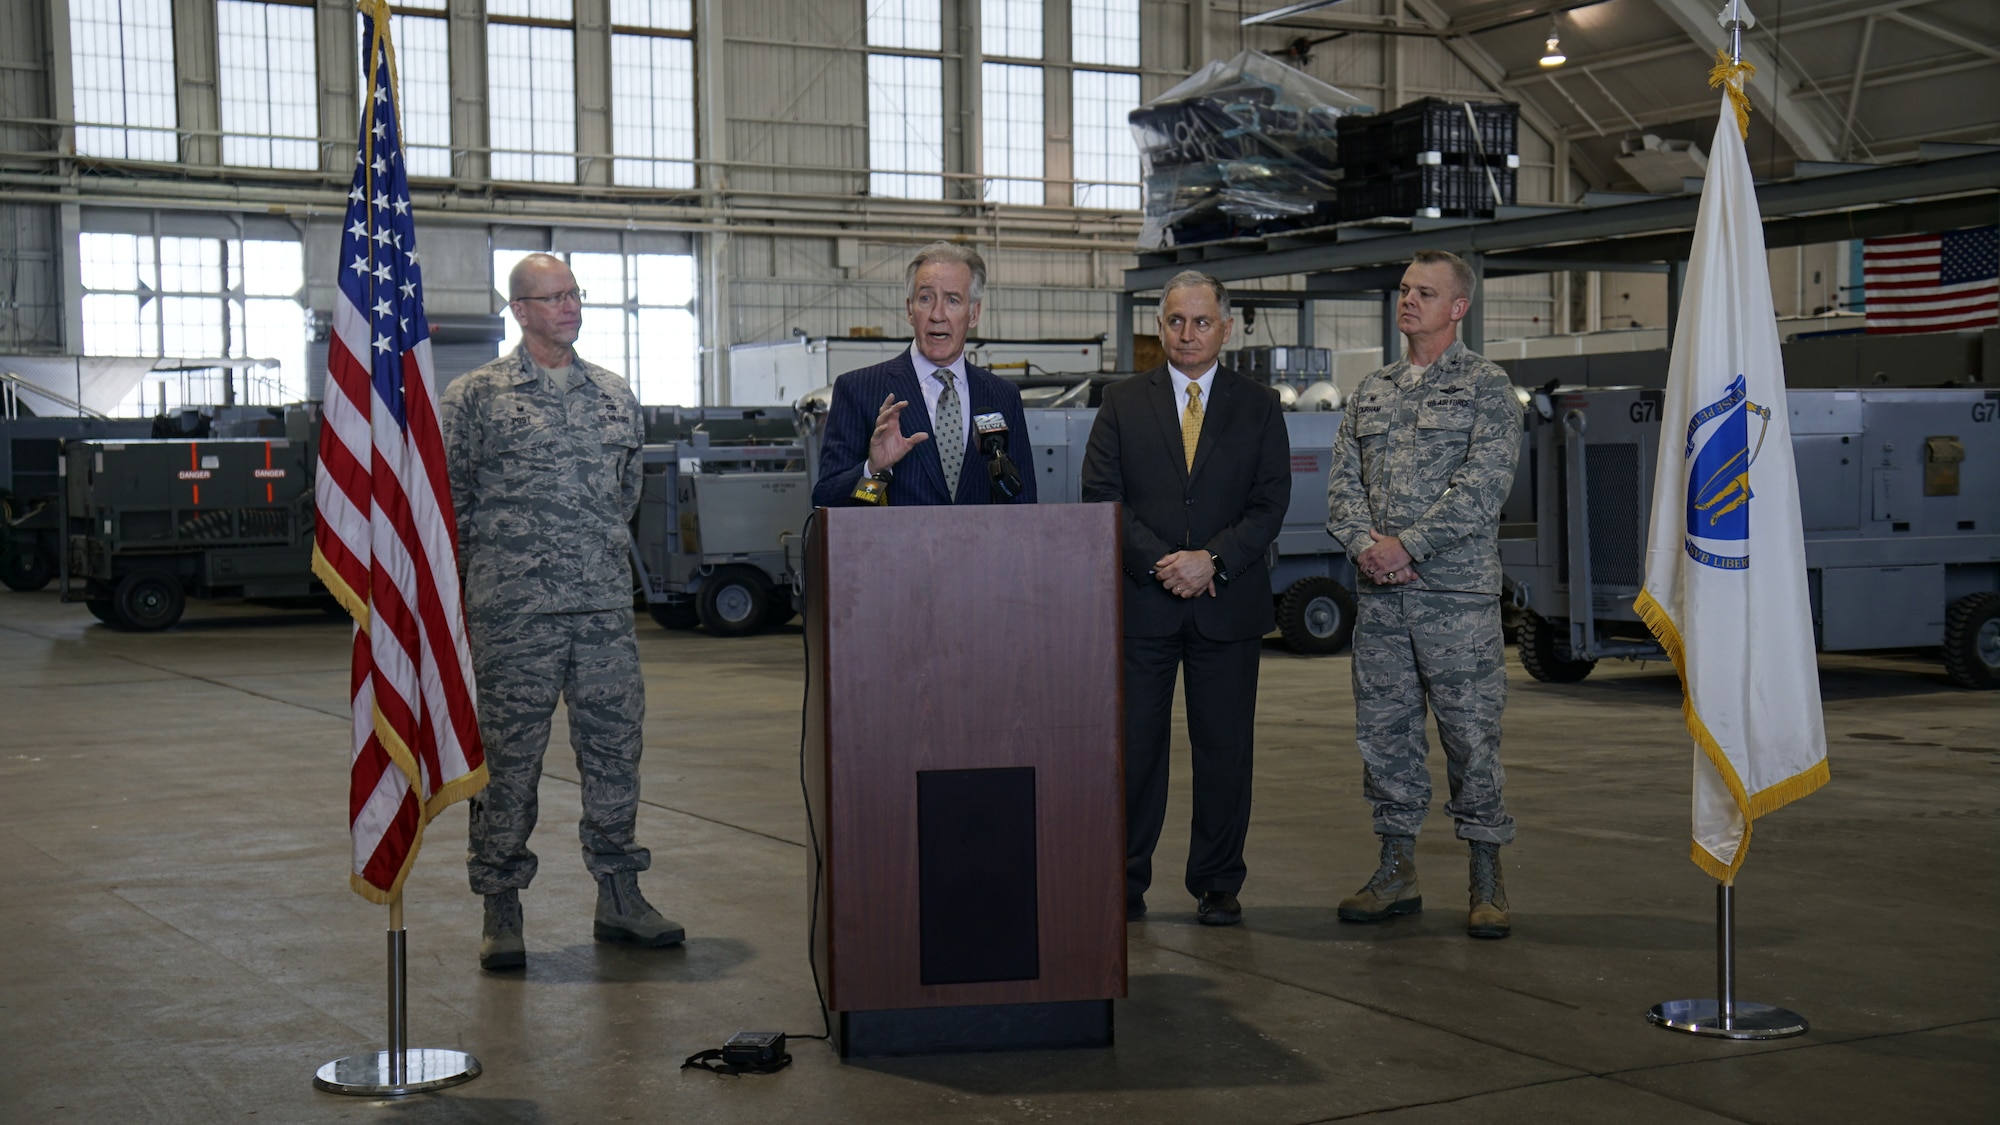 Group shot of 439th Airlift Wing Commander D. Scott Durham, Chicopee Mayor Richard Kos, U.S. Congressman Richard Neal, and 439th Maintenance Group Commander Col. David Post in Hangar 9, one of Westover's 80-year-old hangars.